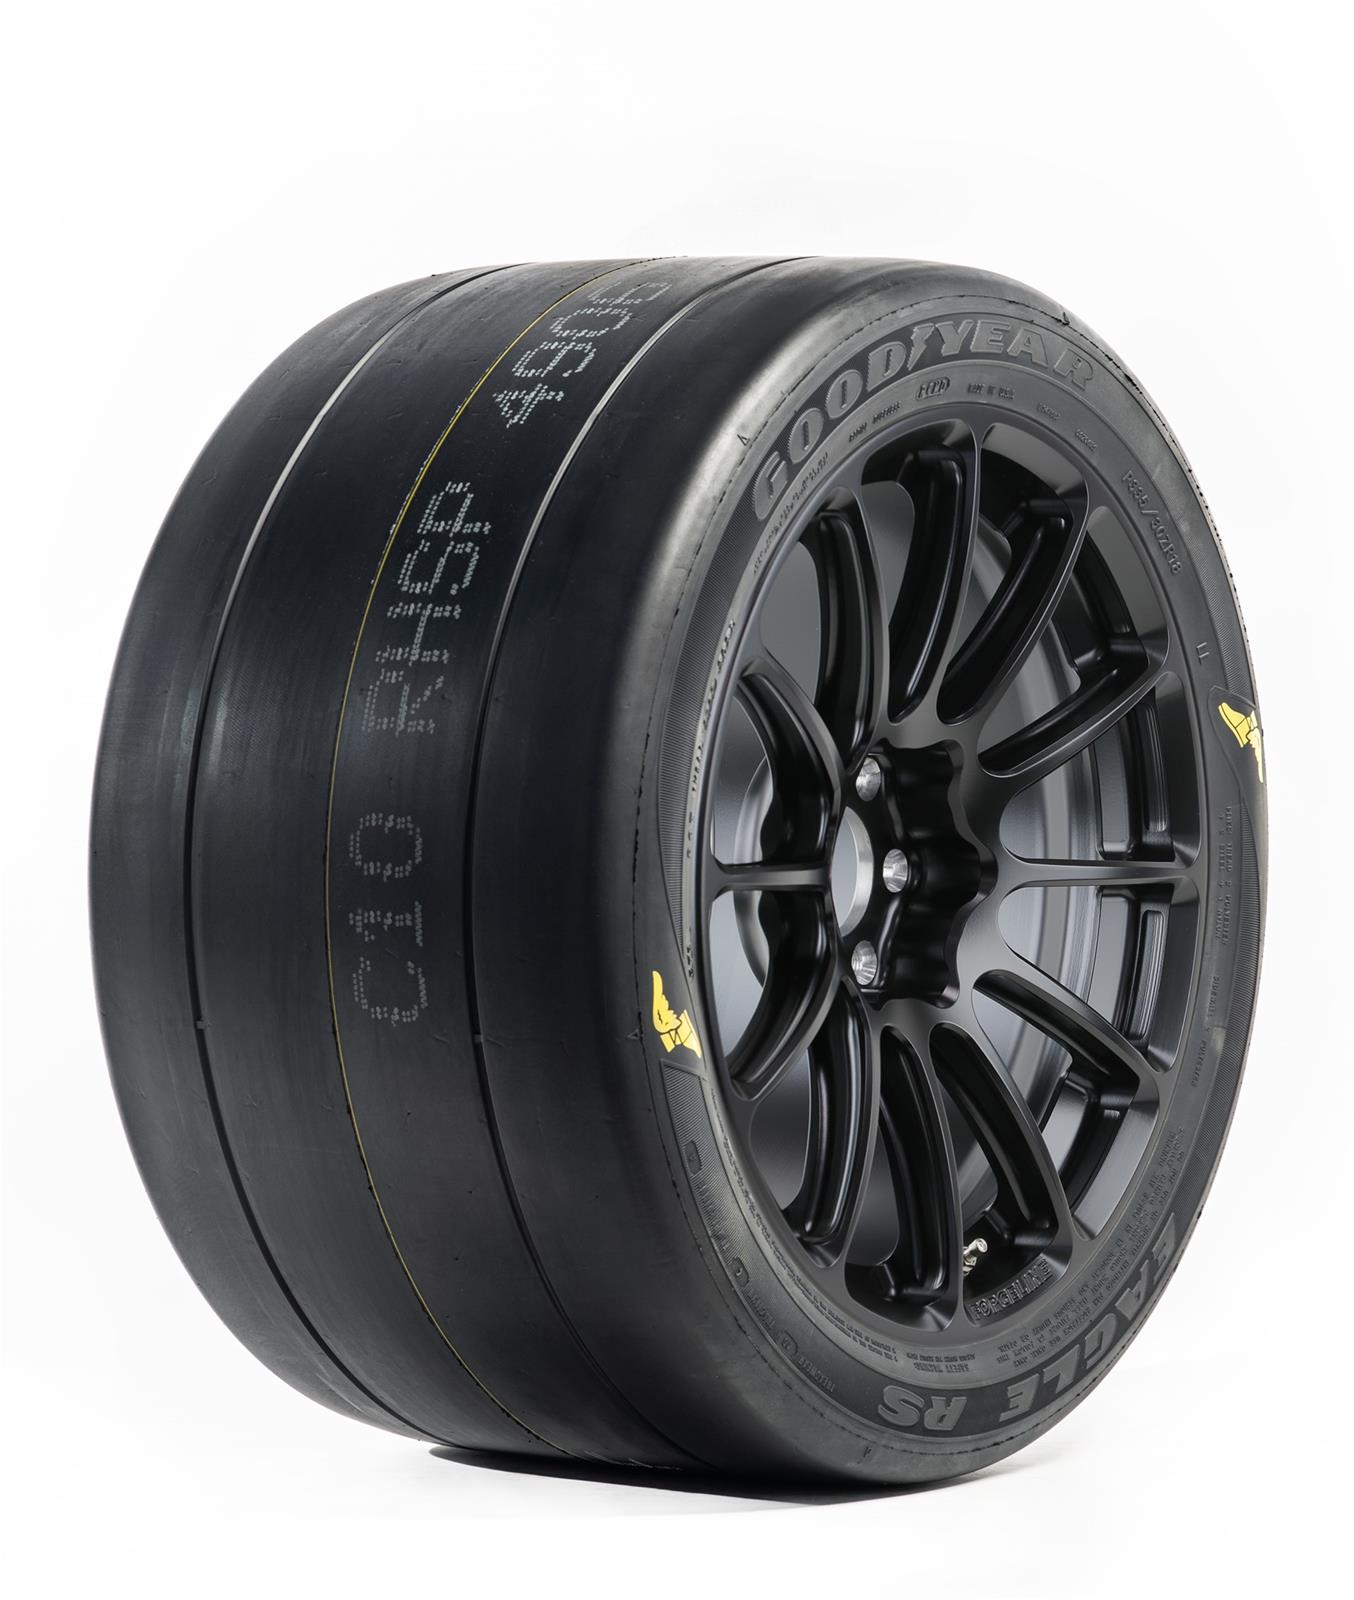 goodyear-racing-tires-4900-goodyear-eagle-rs-dot-radial-tires-summit